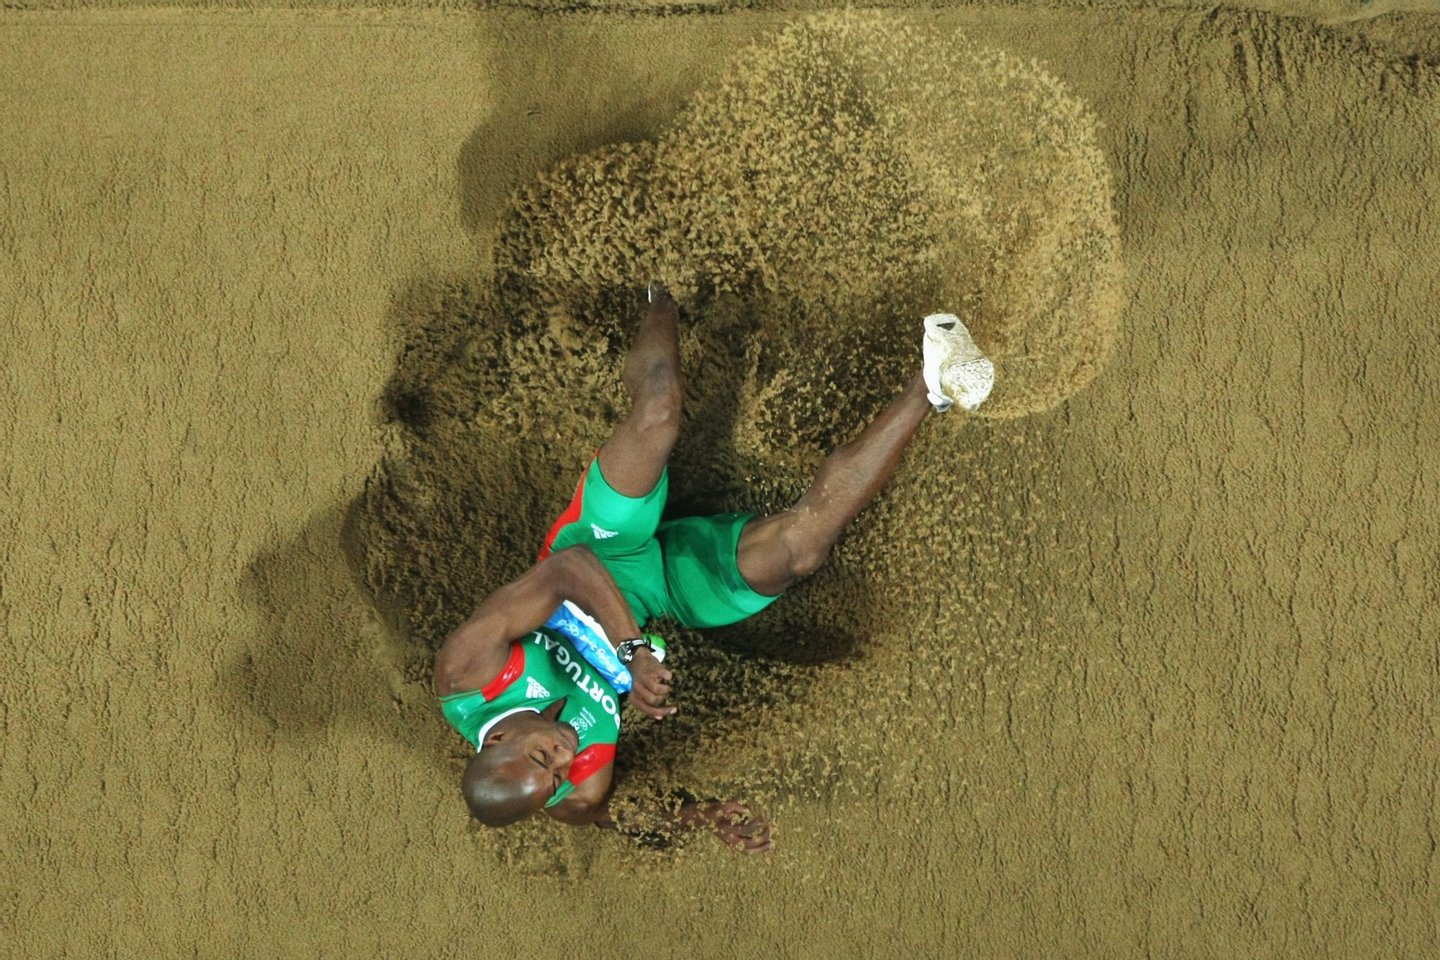 BEIJING - AUGUST 21: Nelson Evora of Portugal competes in the Men's Triple Jump Final held at the National Stadium during Day 13 of the Beijing 2008 Olympic Games on August 21, 2008 in Beijing, China. (Photo by Jed Jacobsohn/Getty Images)